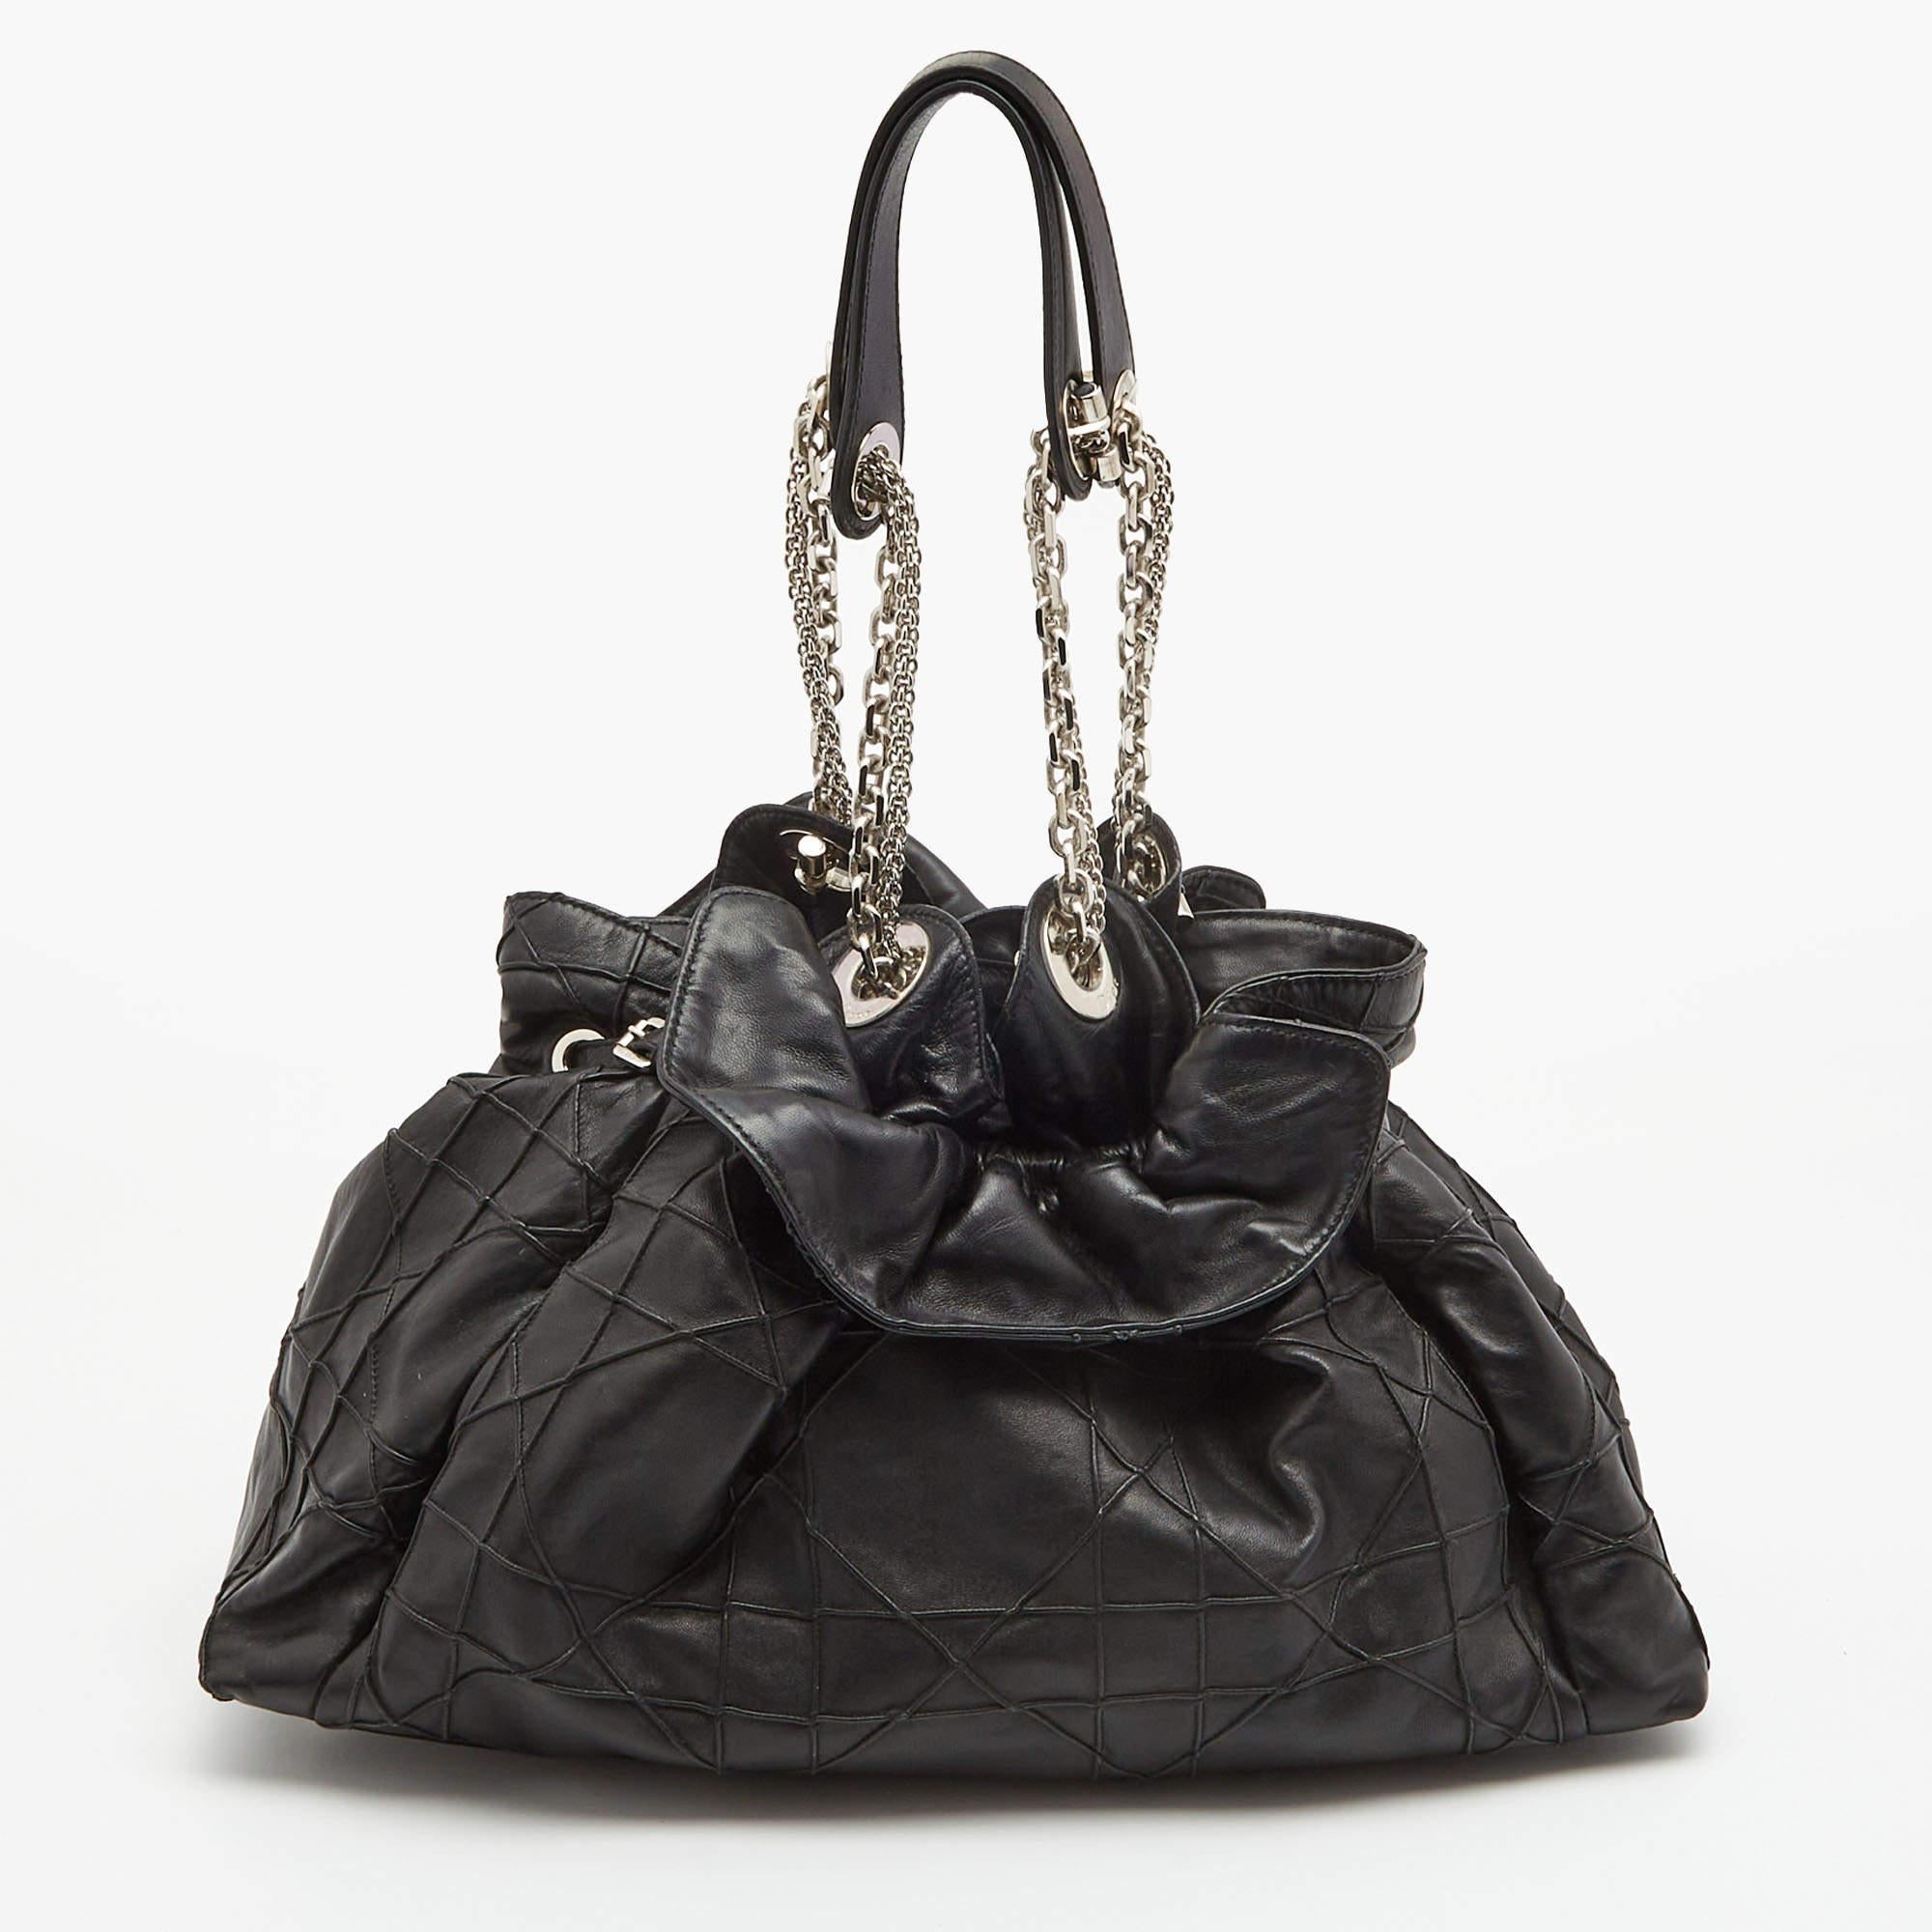 Stylish handbags never fail to make a fashionable impression. Make this designer hobo yours by pairing it with your sophisticated workwear as well as chic casual looks.

